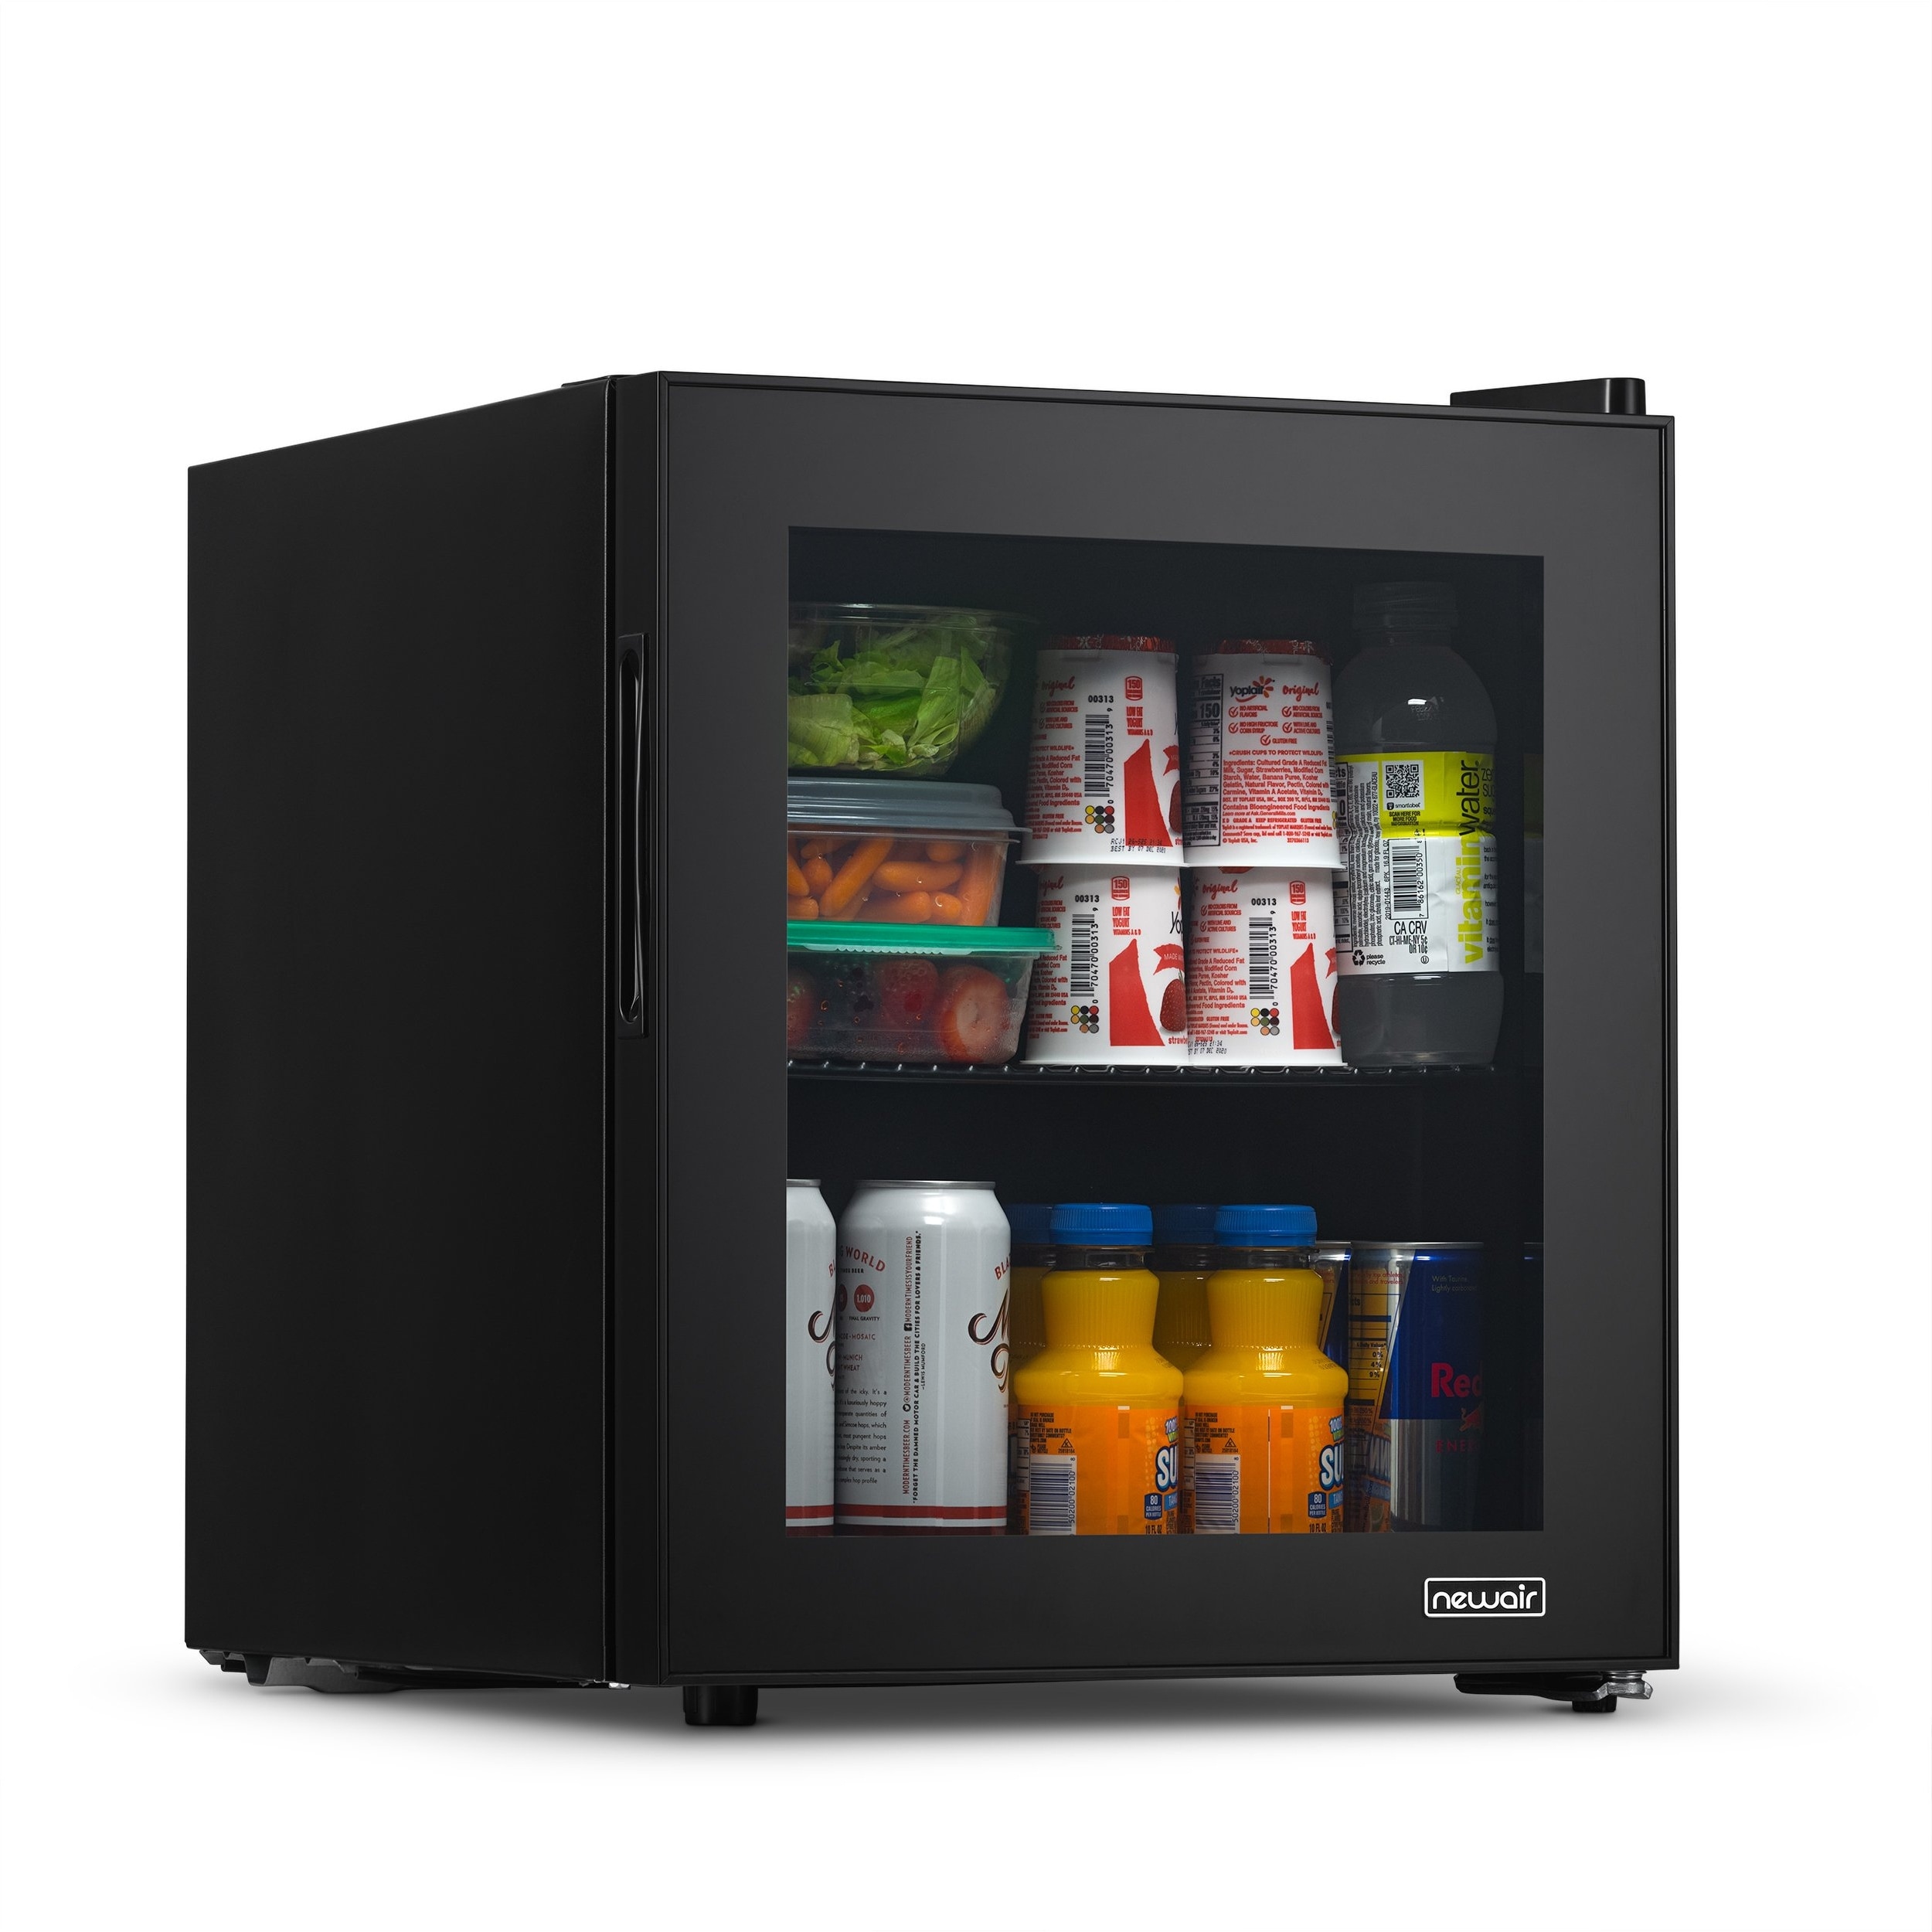 NewAir 60 Can Beverage Fridge with Glass Door, Small Freestanding Mini Fridge in Black, Perfect for Beer, Snacks or Soda